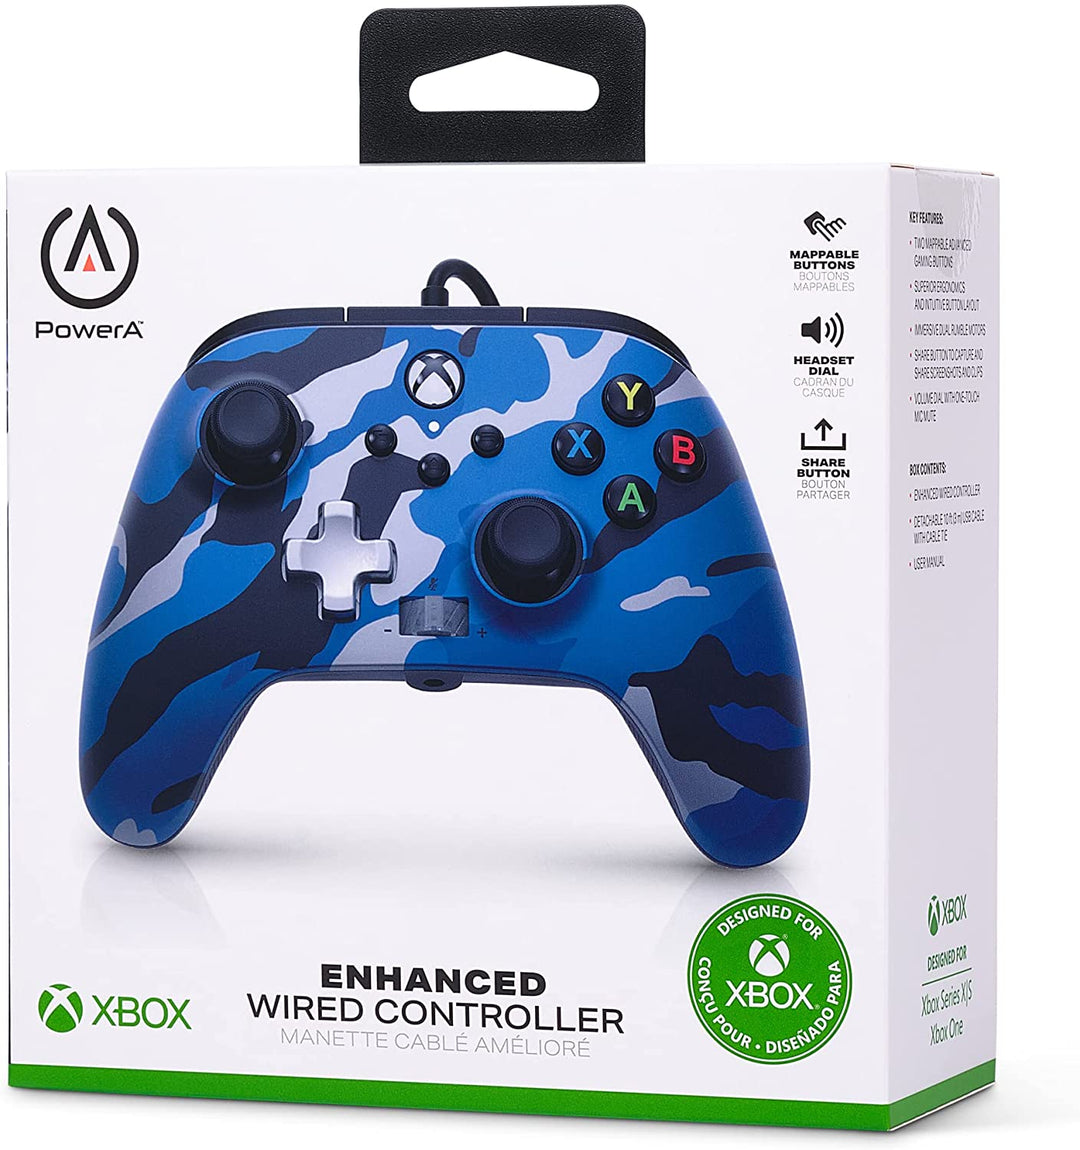 PowerA Enhanced Wired Controller for Xbox - Metallic Blue Camo, Gamepad, Wired V